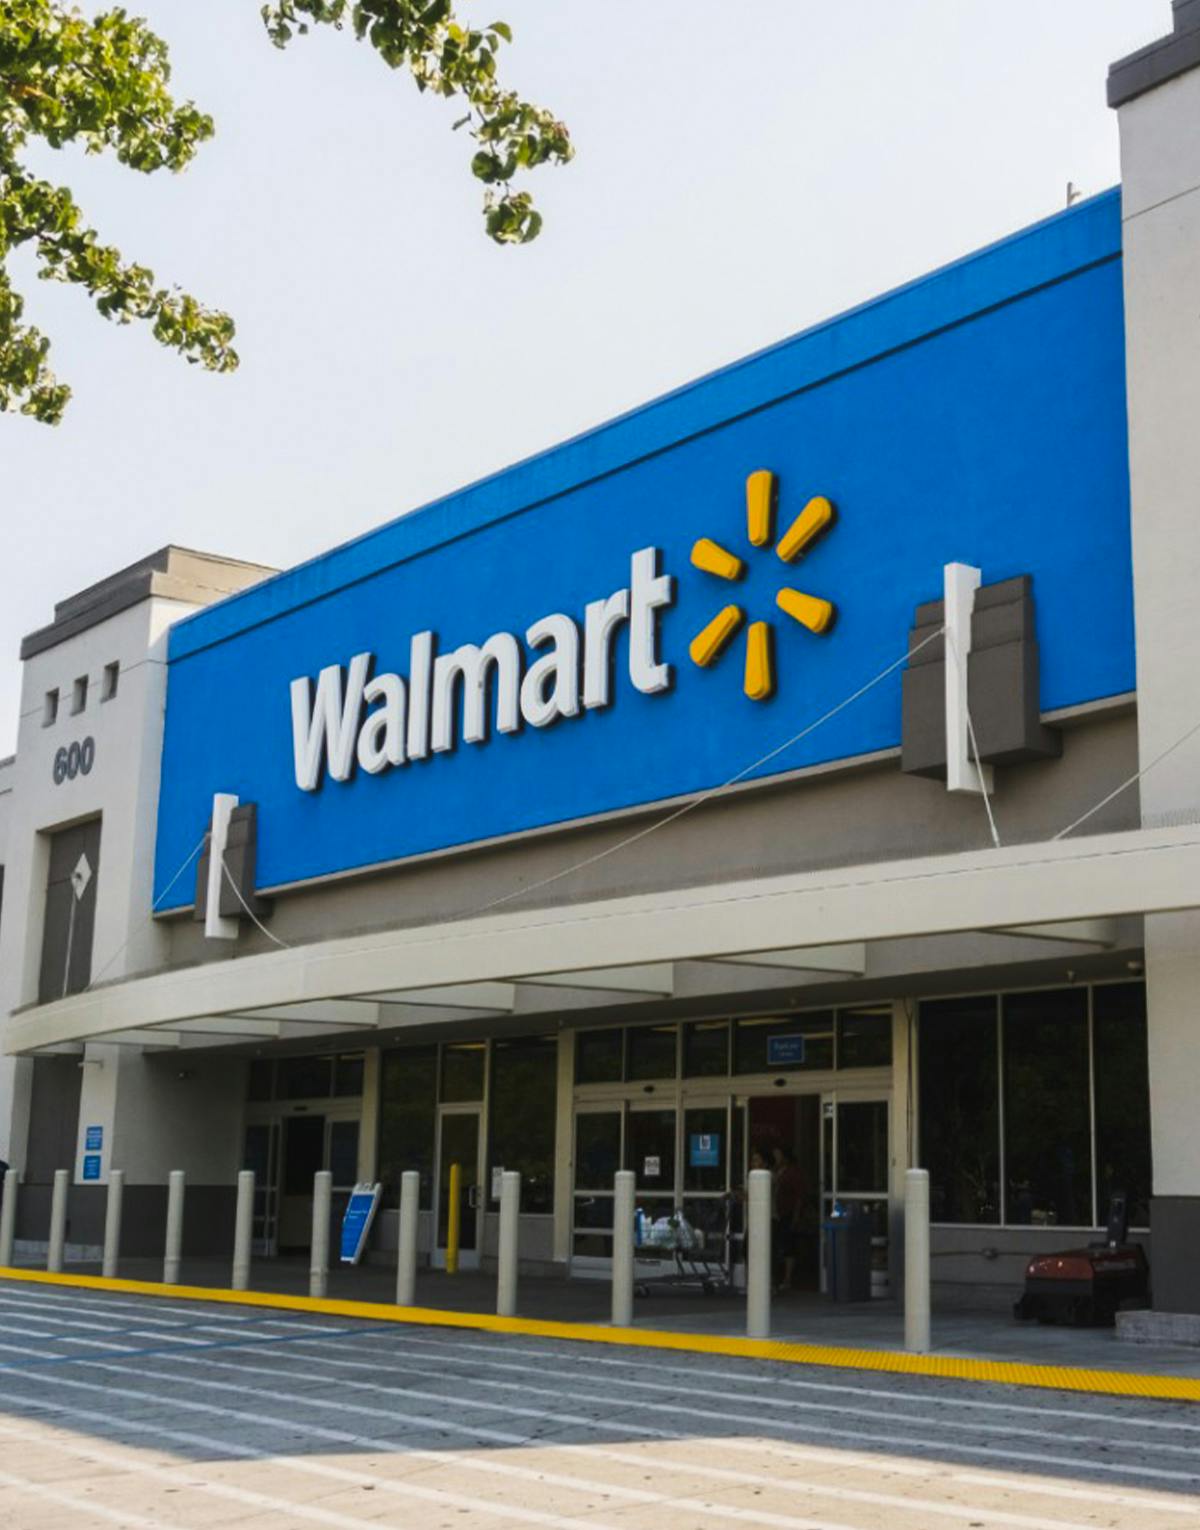 Toward its climate goals, Walmart works with suppliers to tamp down greenhouse gas emissions along its supply chain, with millions of metric tons avoided since 2017.